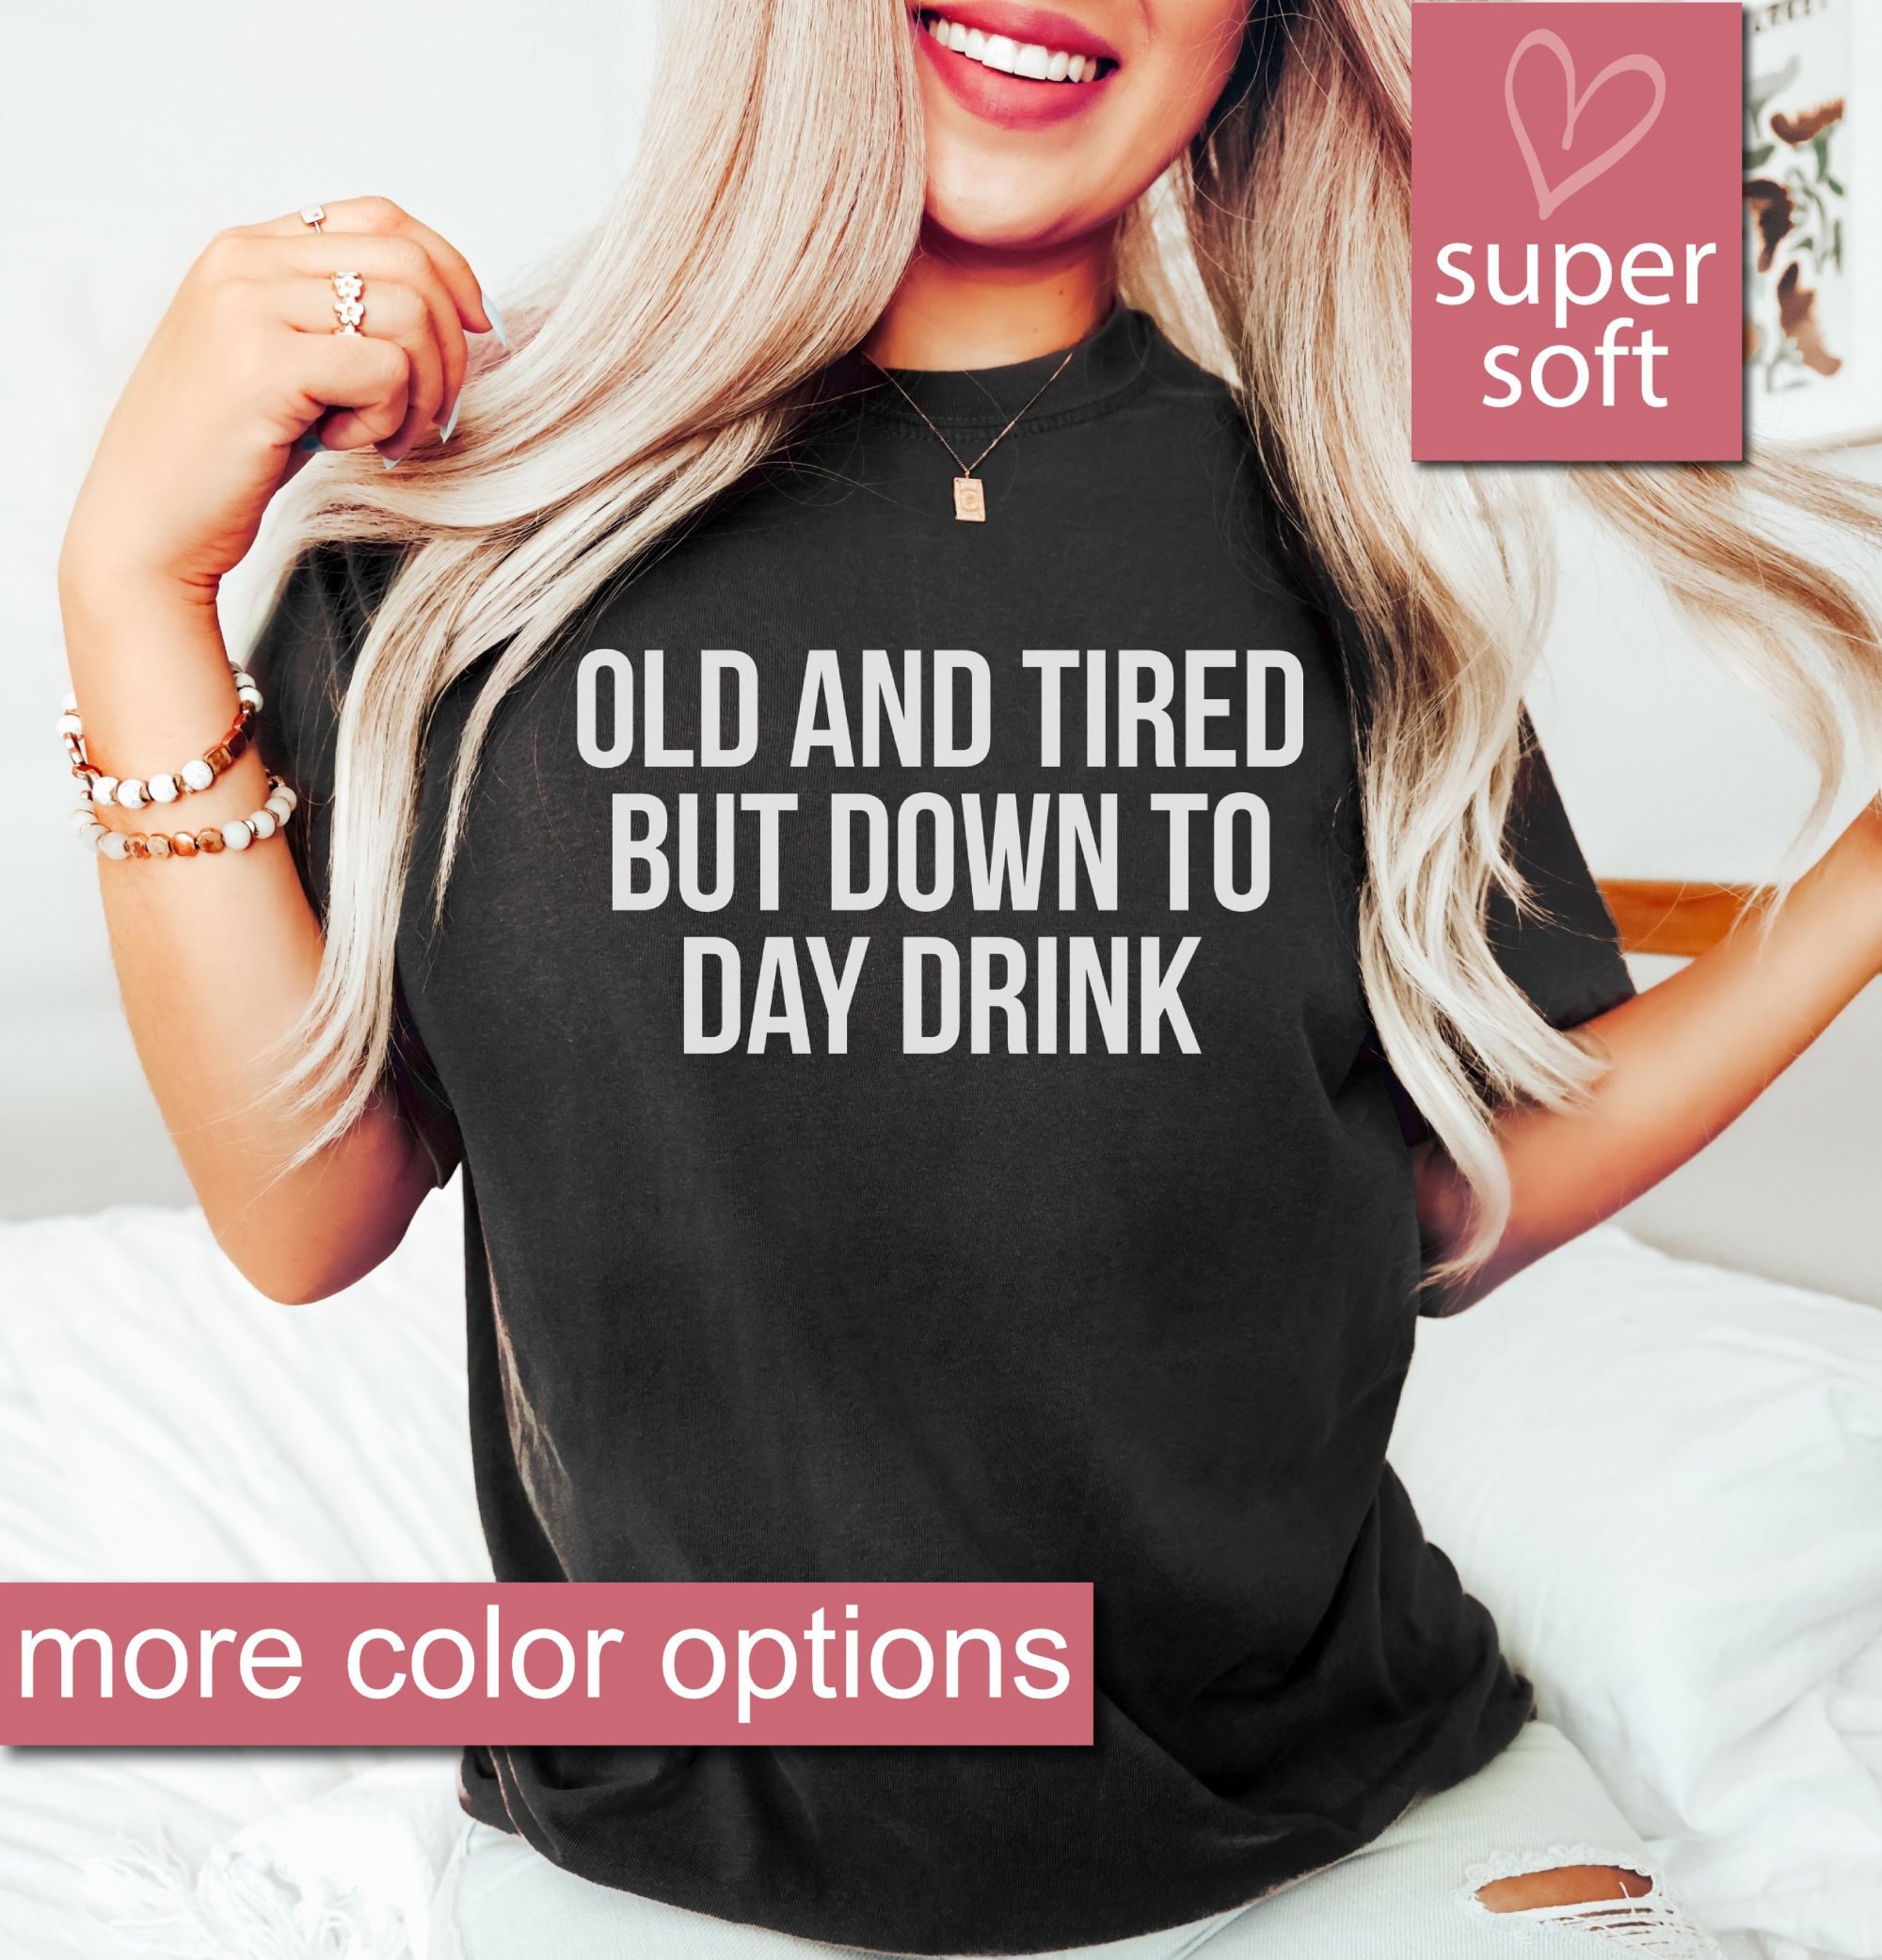 Old and Tired but Down to Day Drink T-shirt Funny Drinking photo photo